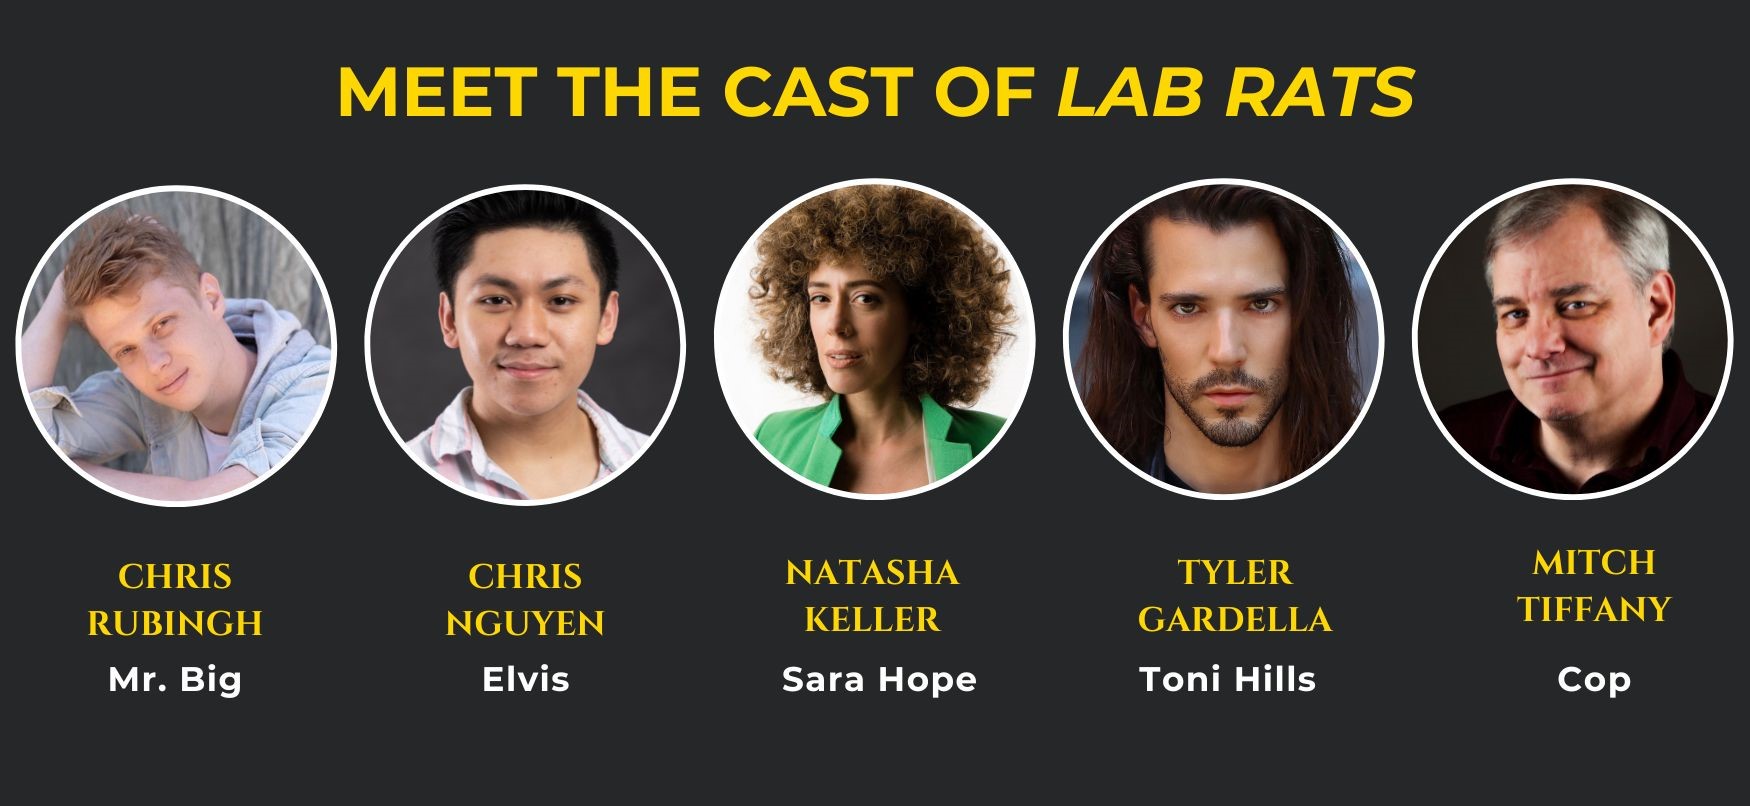 The Cast of Lab Rats, Wedge Series at the Hangar Theatre